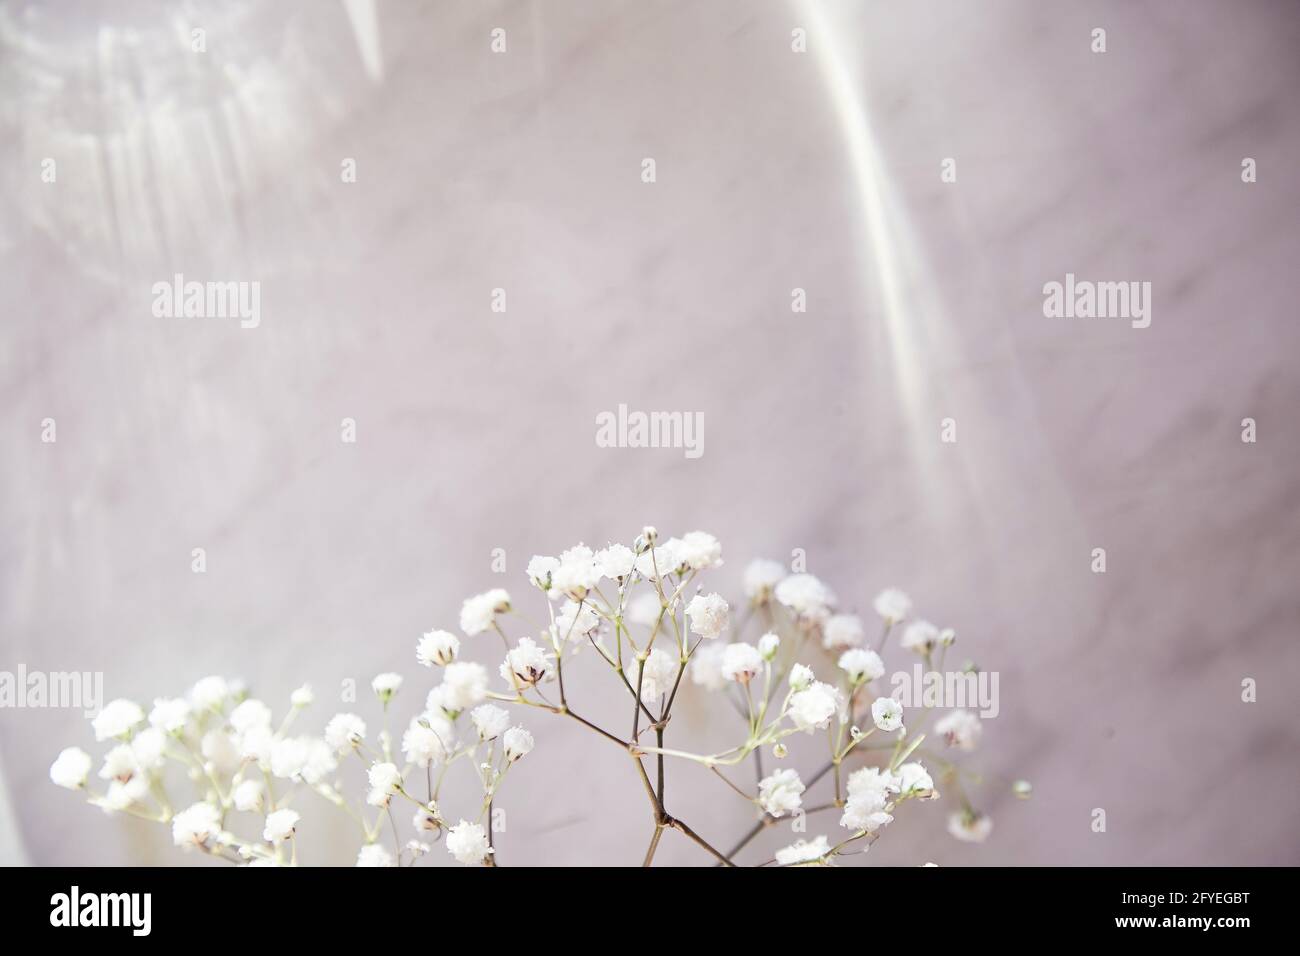 Trendy background with natural shadows, lights and white gypsophila flower. Selective focus. Copy space. Stock Photo